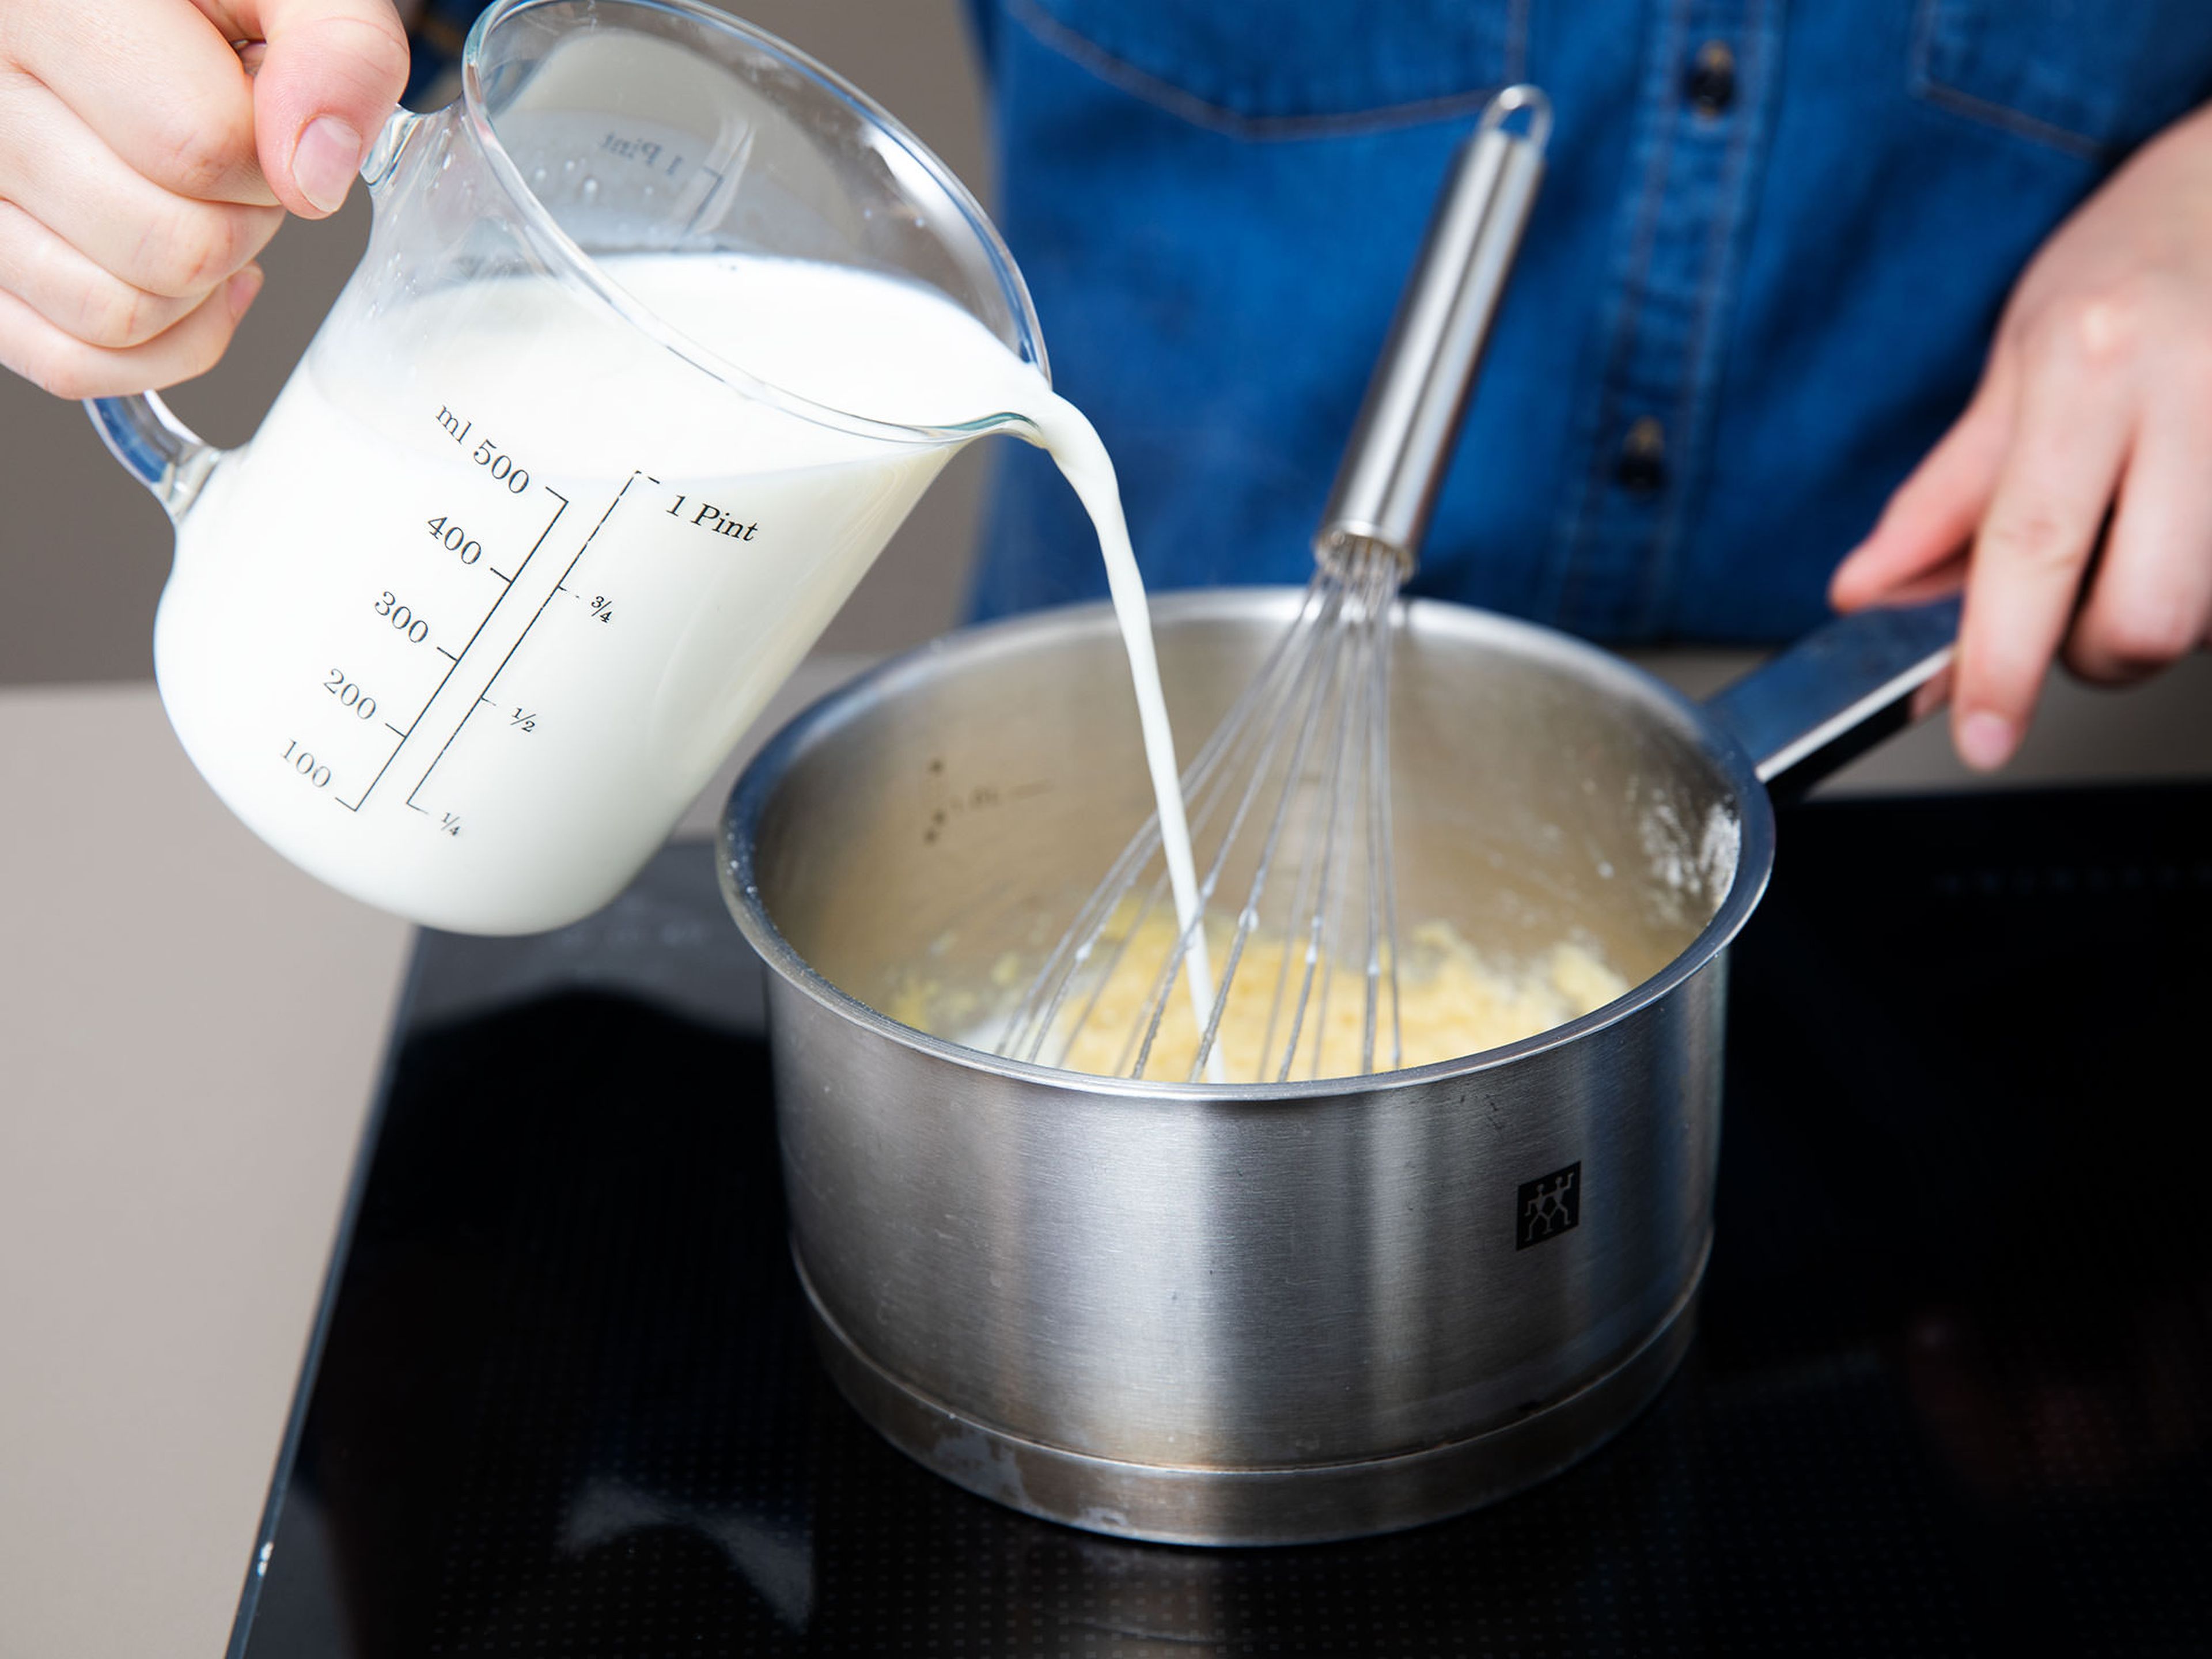 To make the béchamel sauce, melt butter in a saucepan over medium heat. Sift in flour and stir continuously into a paste. Once it begins to bubbles, reduce heat to low and gradually add milk while whisking. Whisk vigorously until sauce becomes smooth, then leave to simmer for approx. 3-4 min., until thickened. Remove from heat and whisk in egg. Season with nutmeg, salt, and pepper to taste.